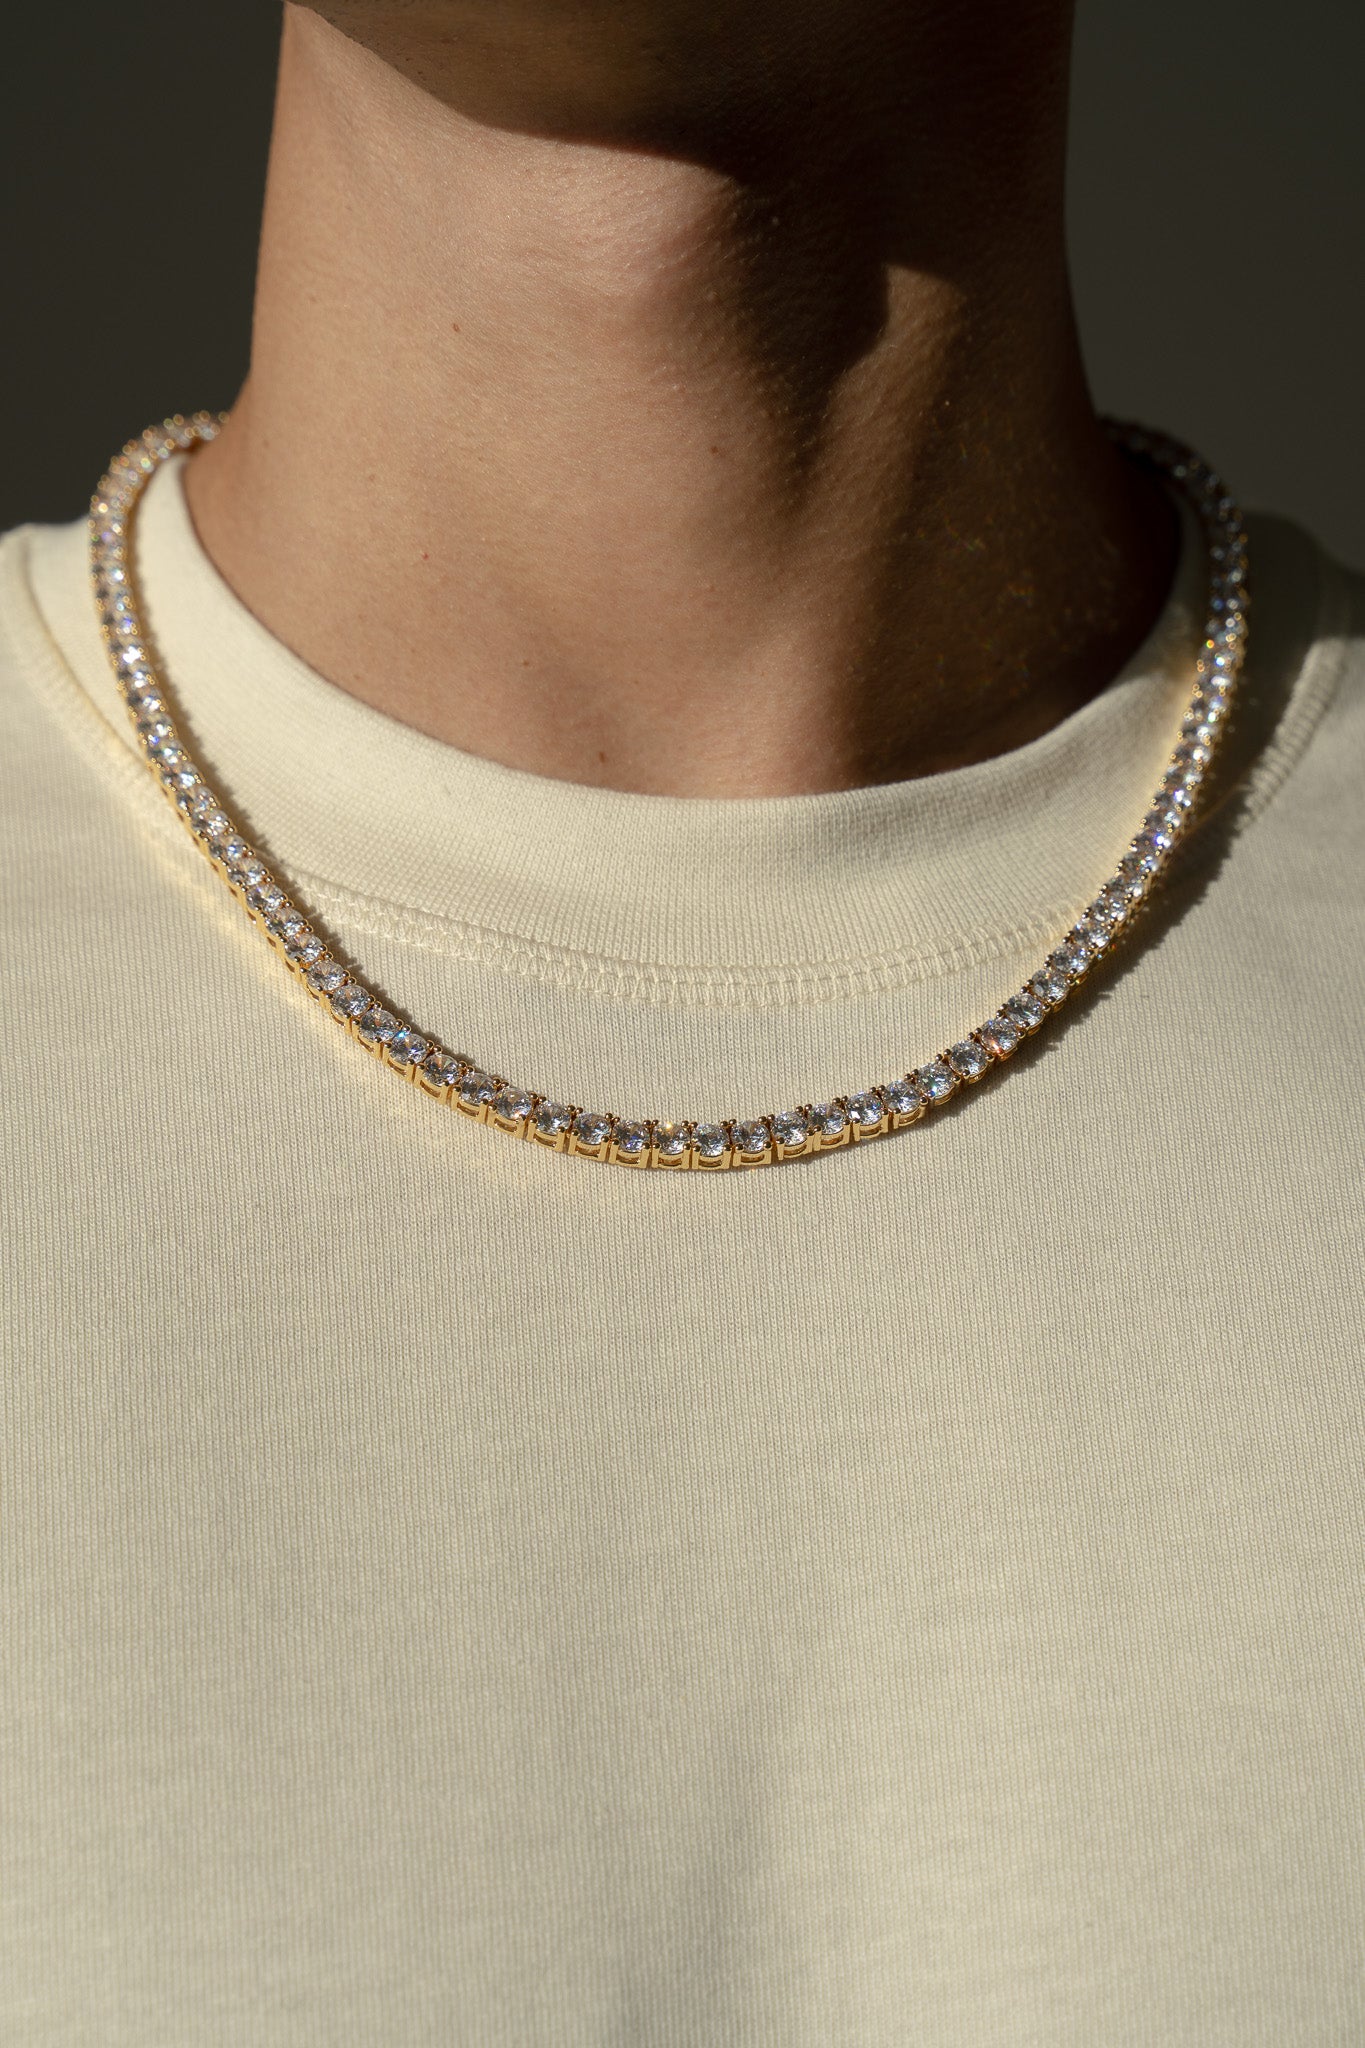 Heirloom Tennis Necklace in Gold - 5mm